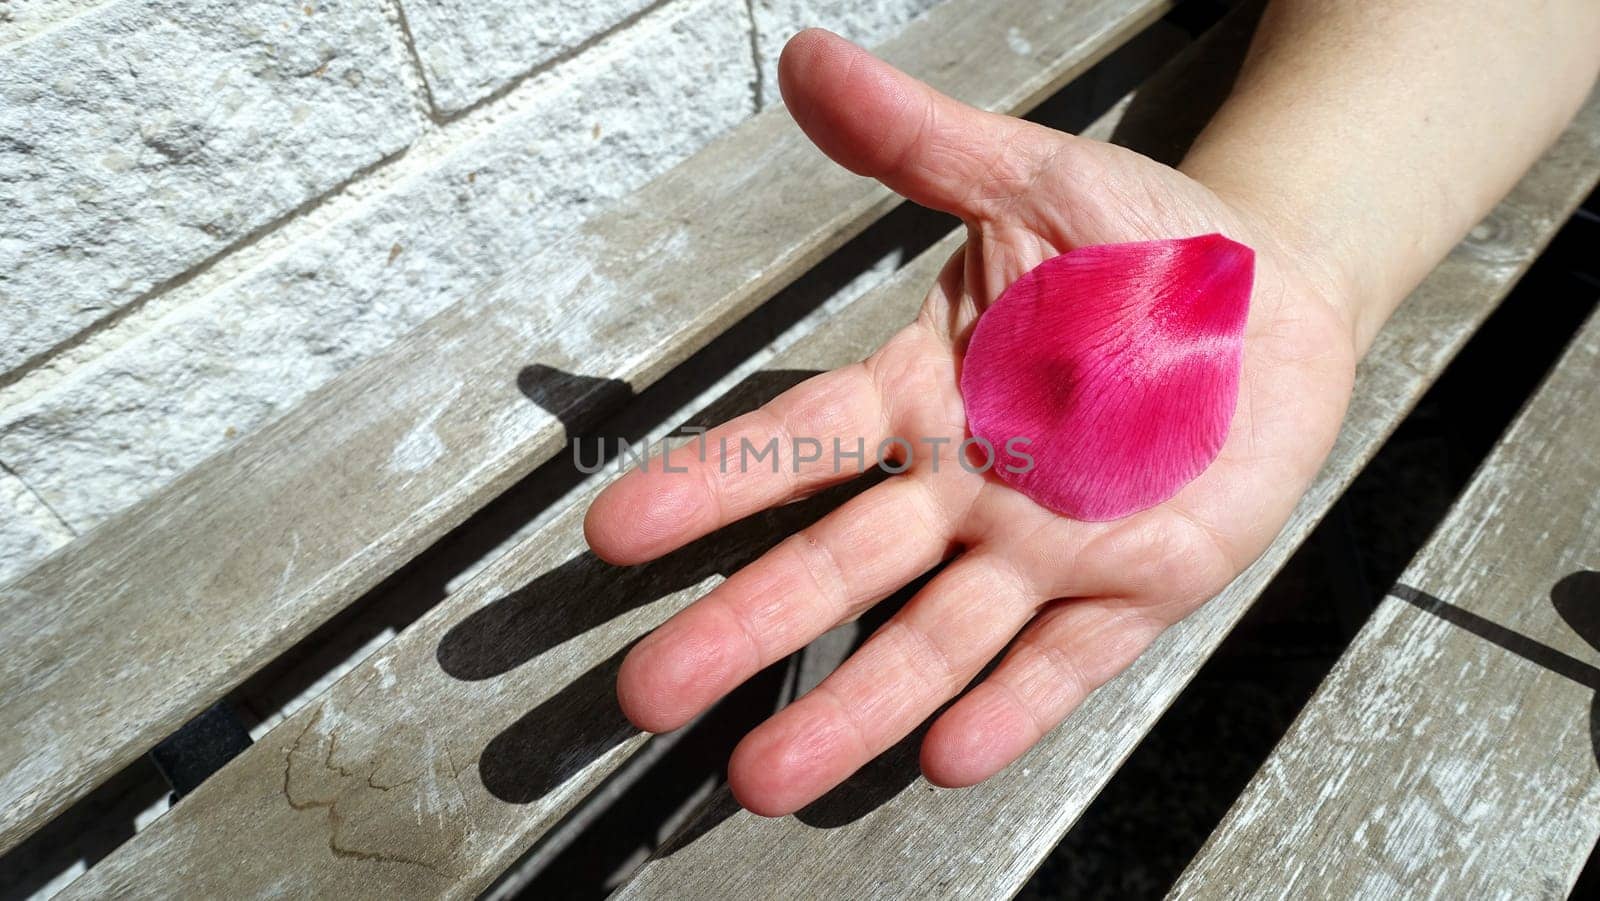 A petal of a freshly fallen pink flower resting in the palm of a hand.